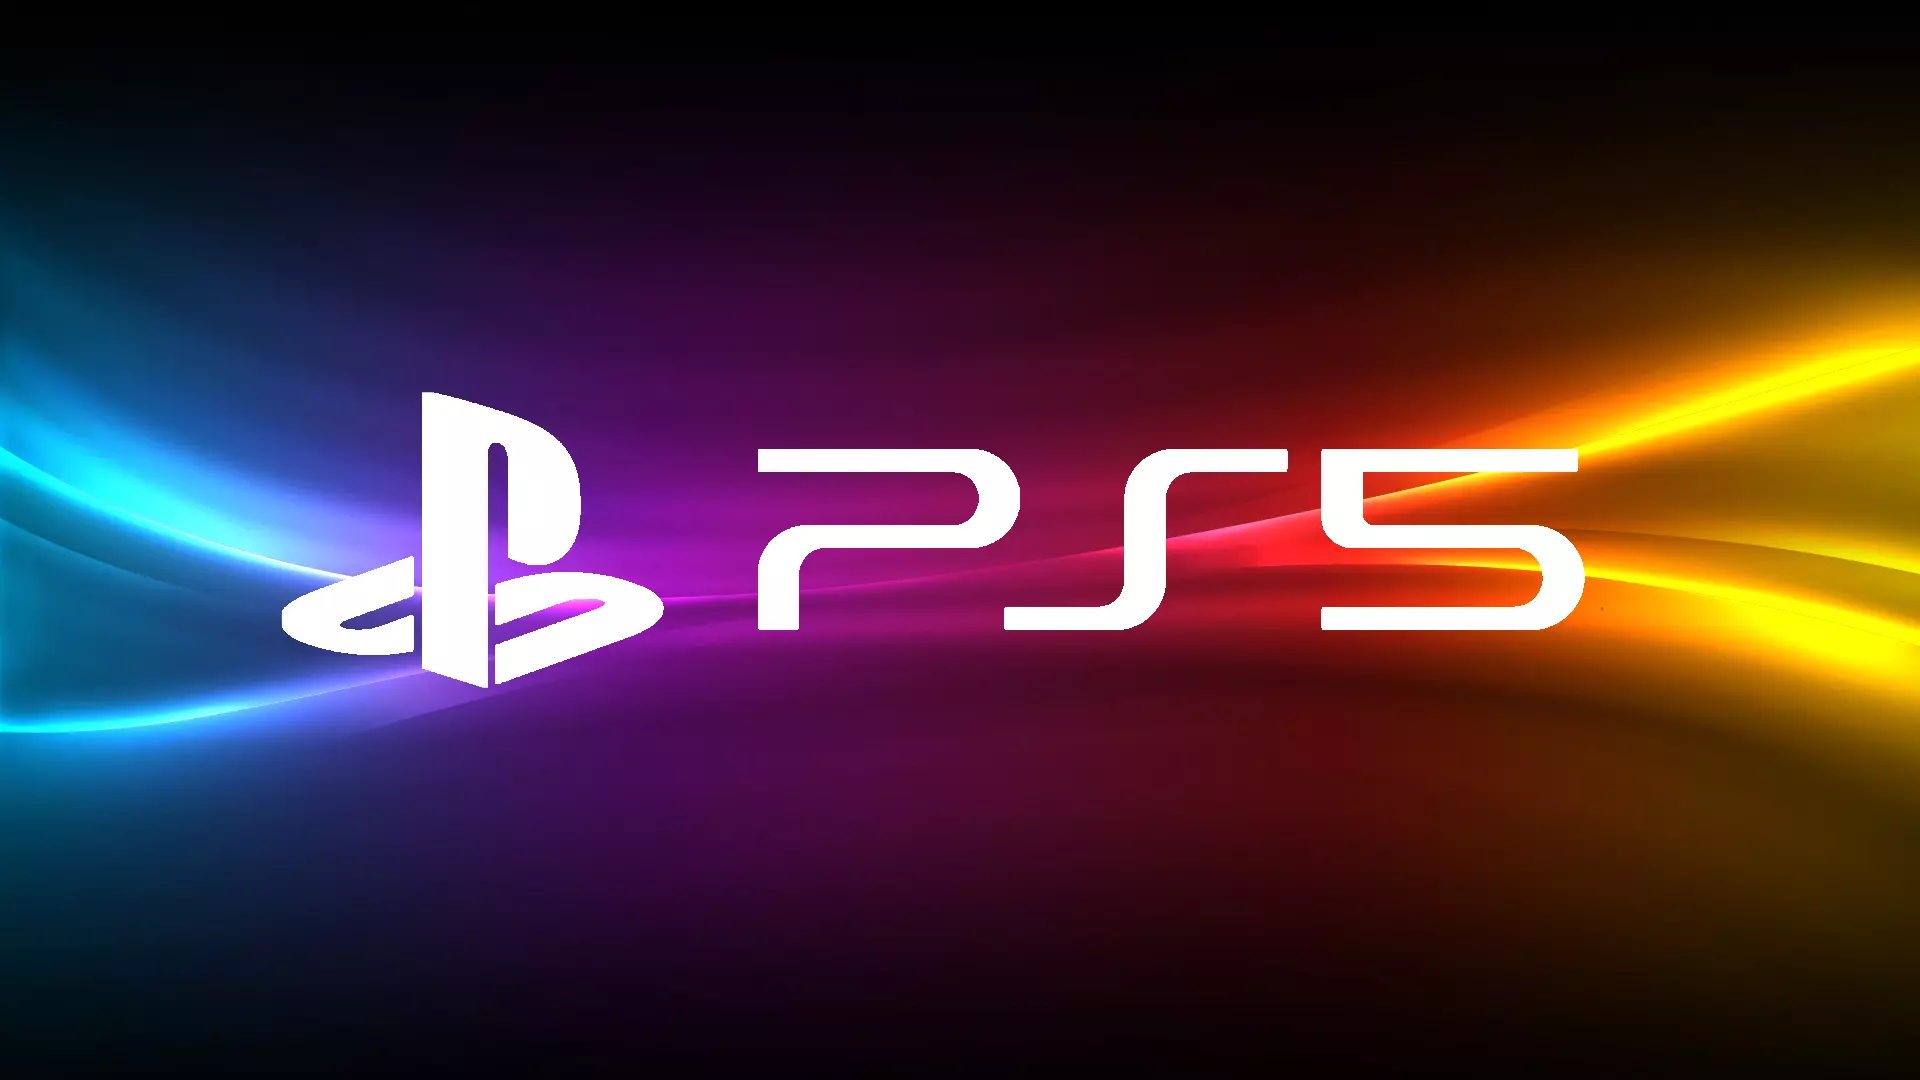 Can you play PS3 games on your PS5